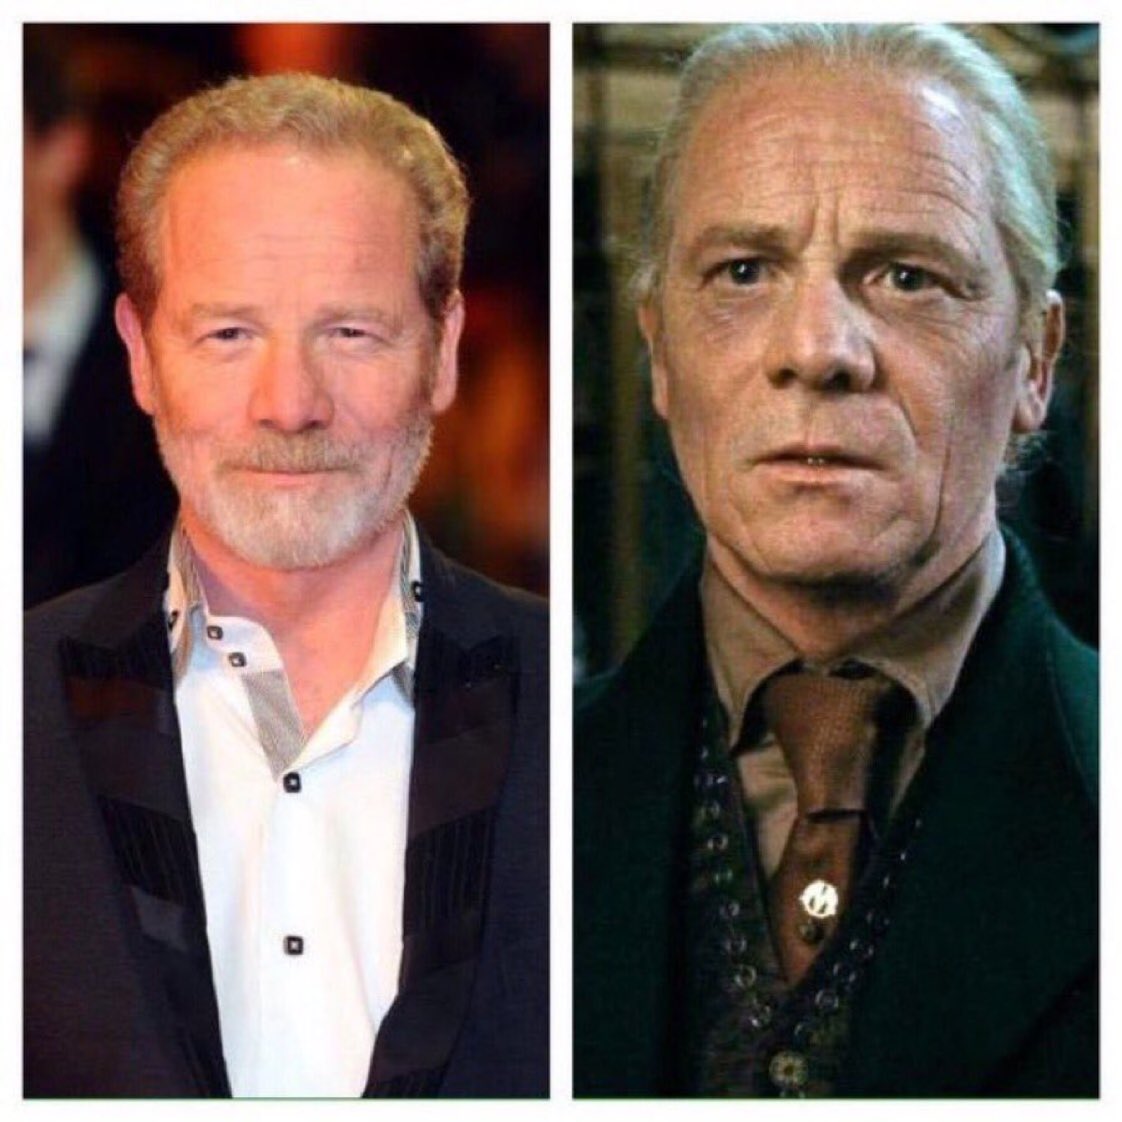  November 2: Happy Birthday, Peter Mullan! He played Yaxley in the films. 